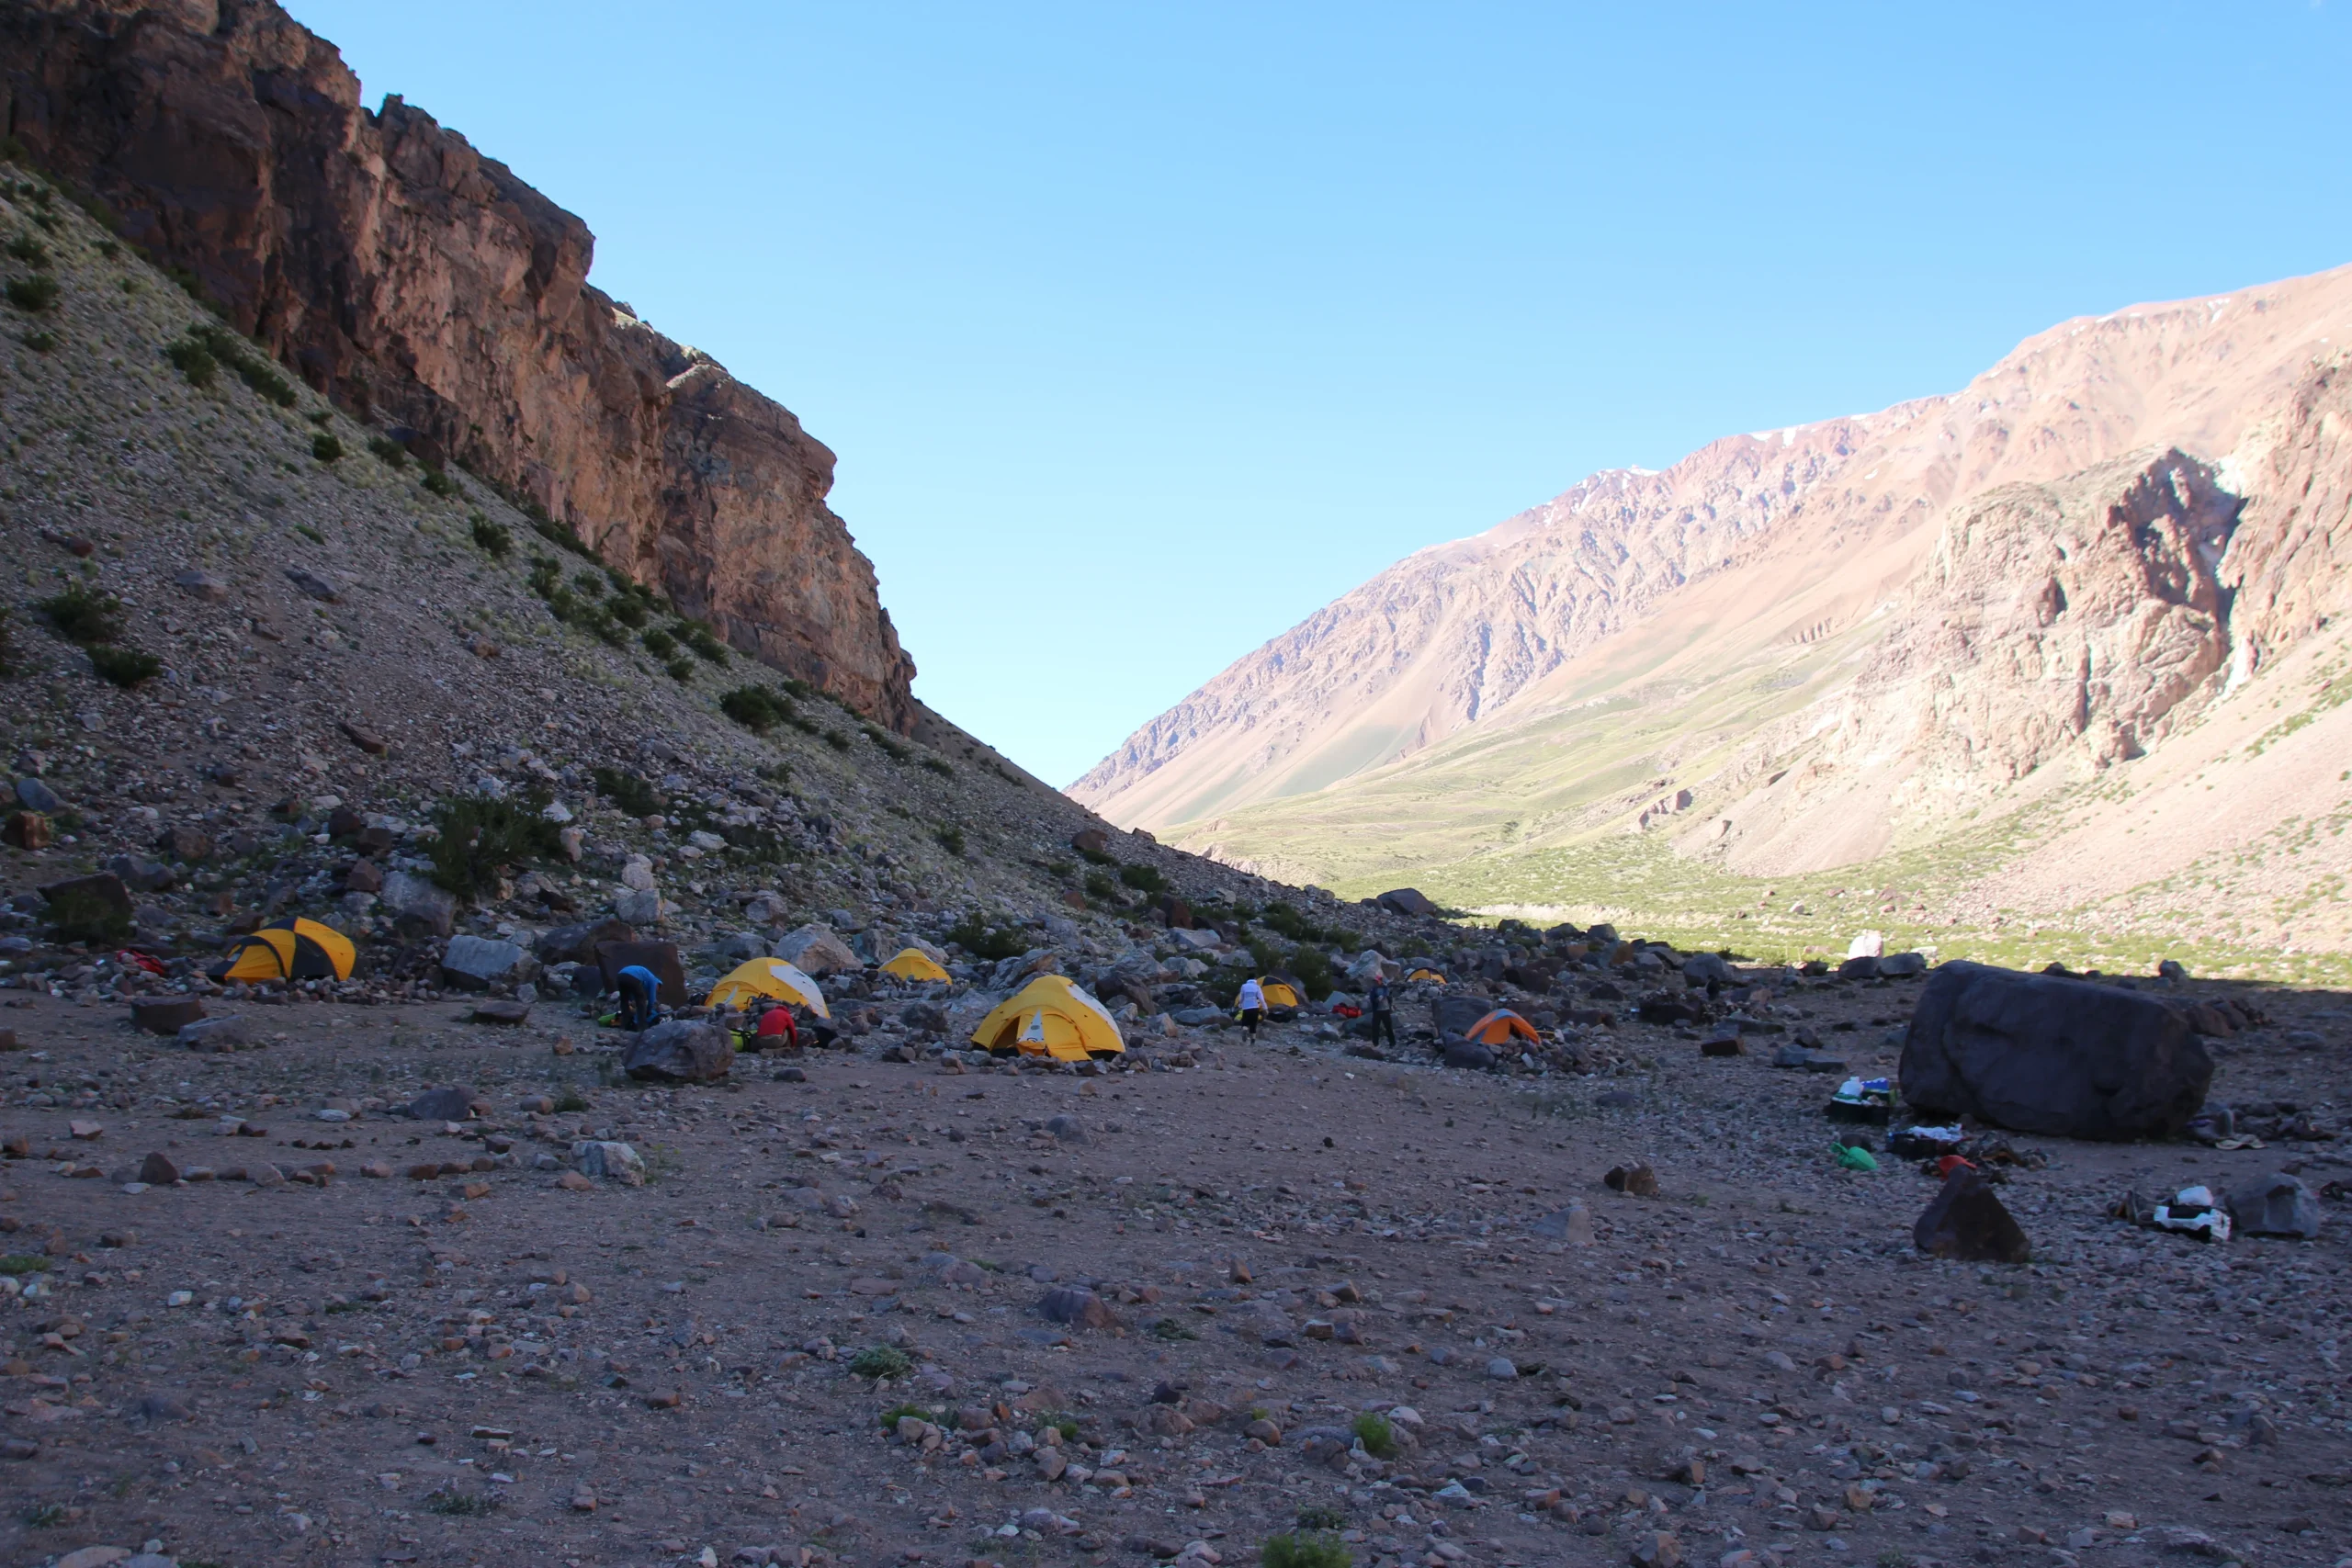 Mountaineering tents in an Aconcagua valley